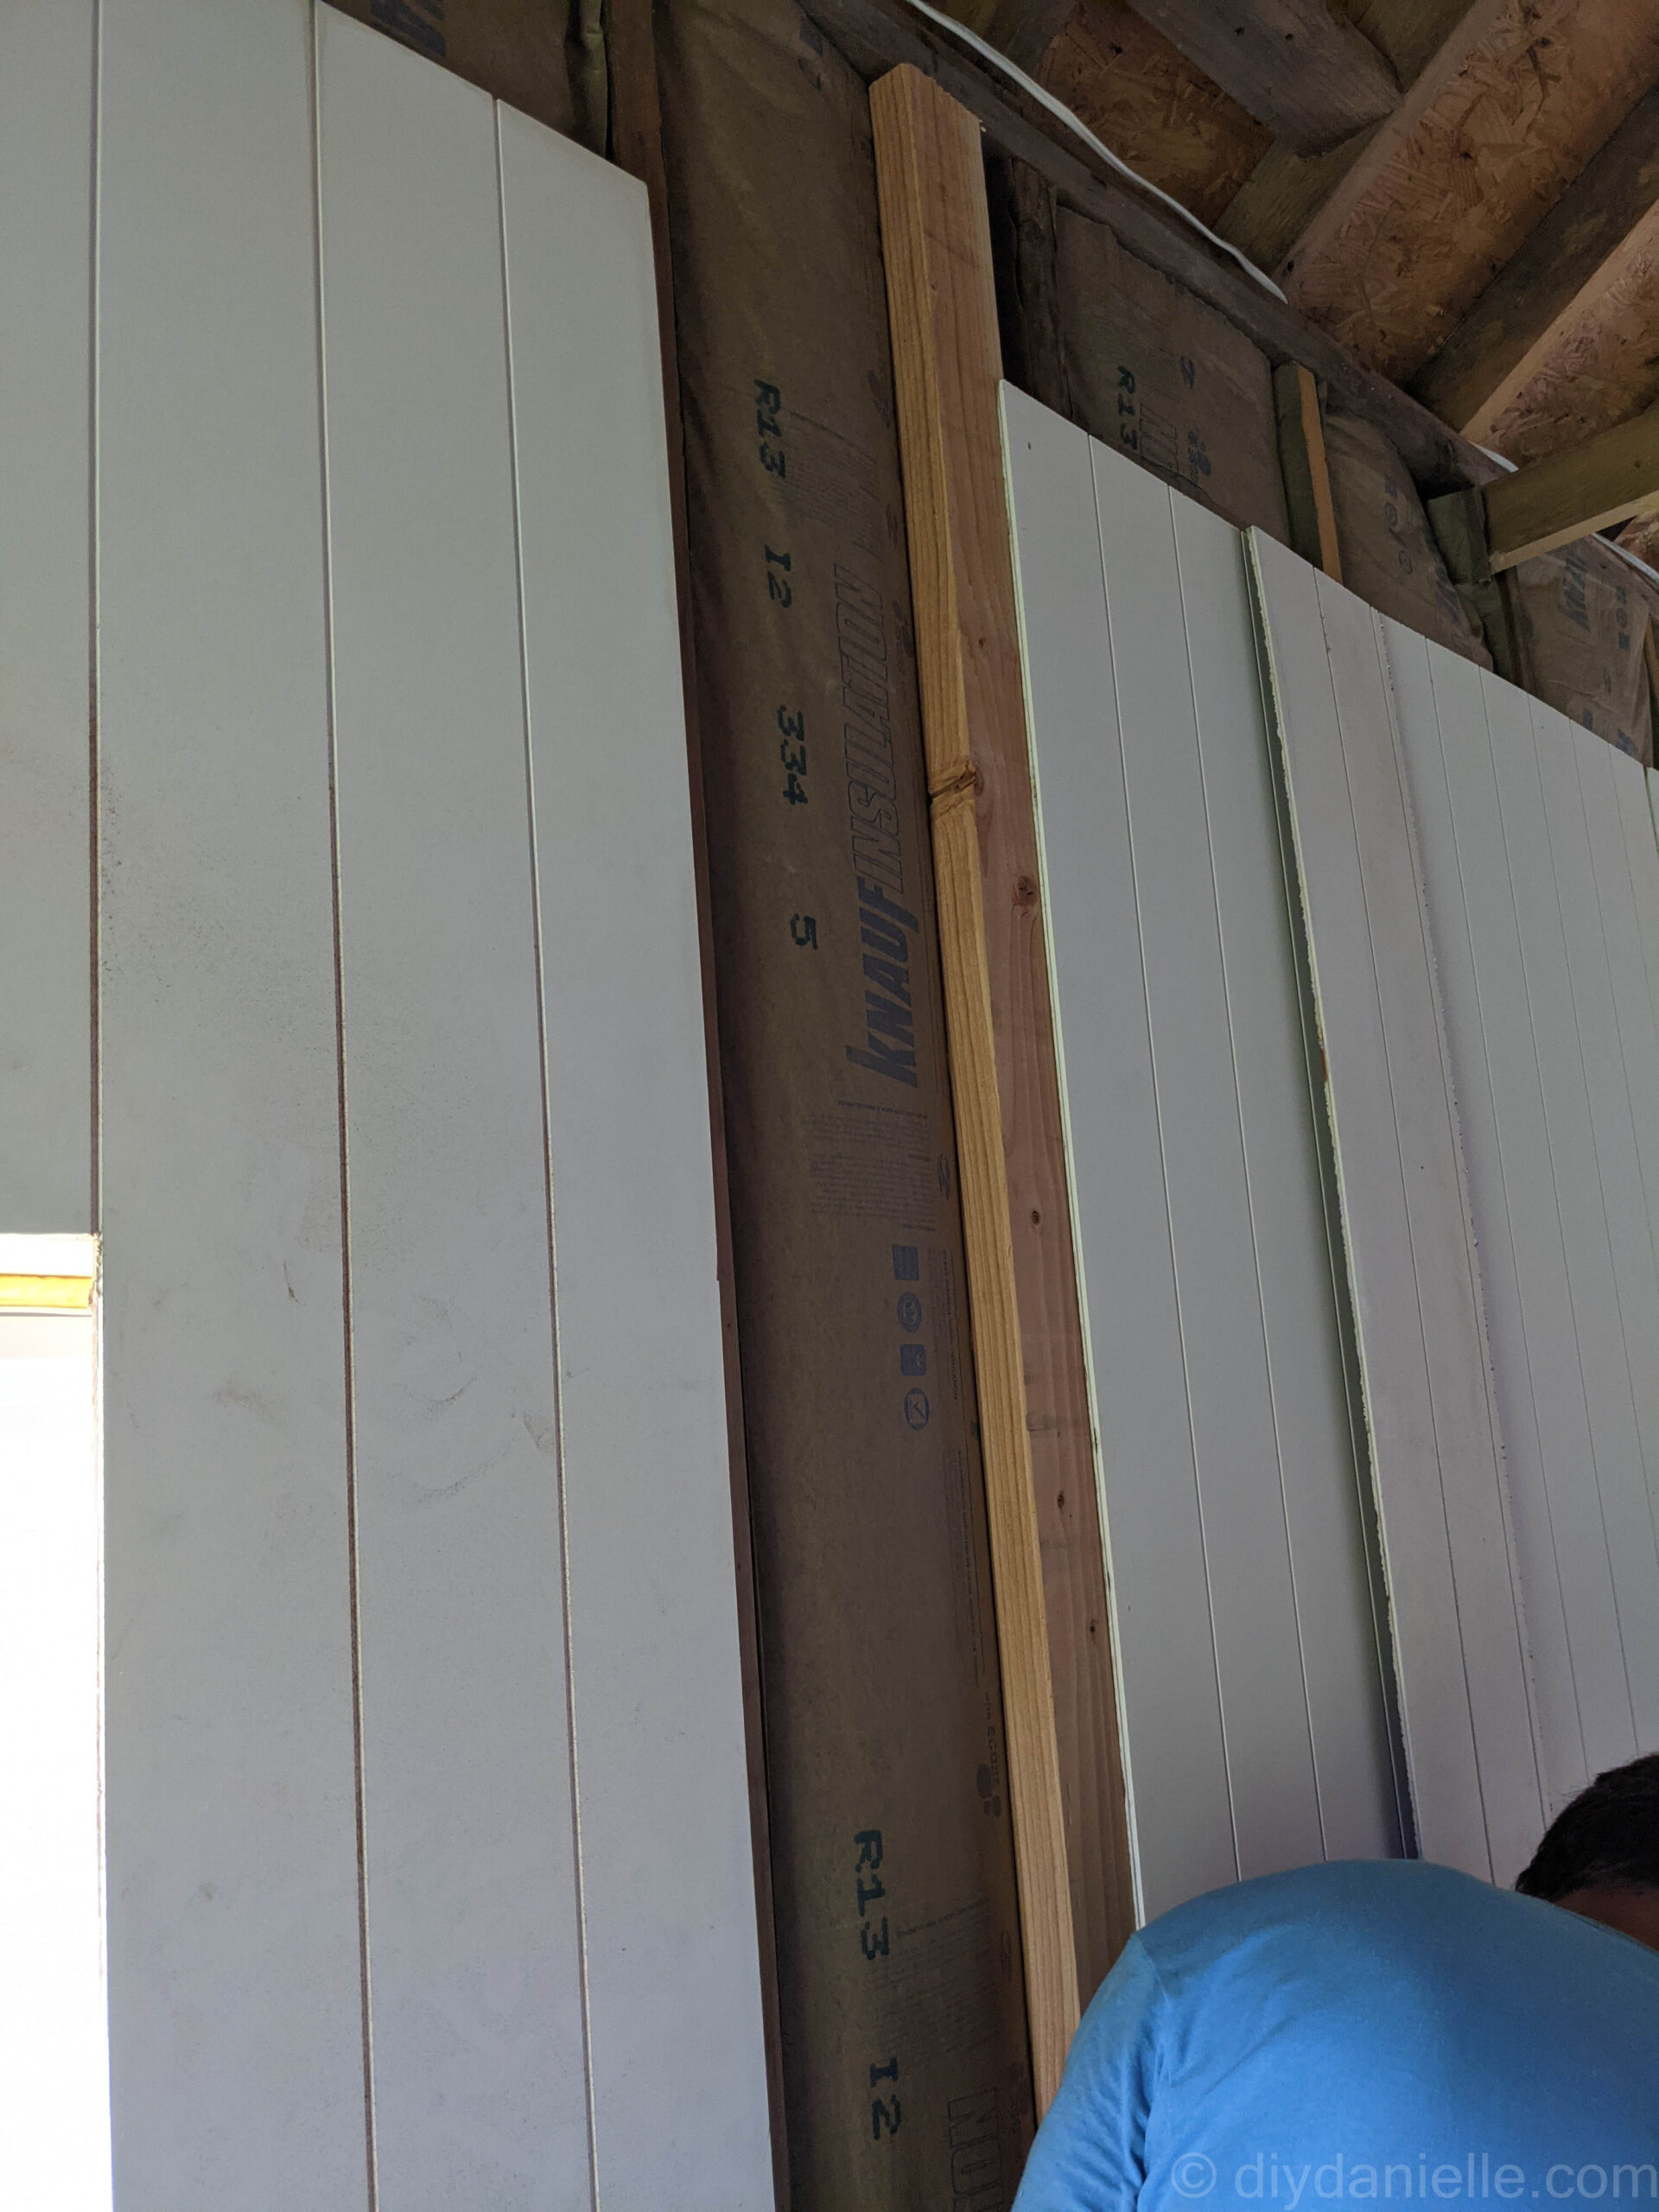 In this photo, we placed an 8' 2x4 into the stud bay where the two panels will meet. The large side of the 2x4 is facing out and the 2x4 is screwed into the top and bottom of the studs supporting the wall. One PDF panel is installed and there's another waiting to be placed.